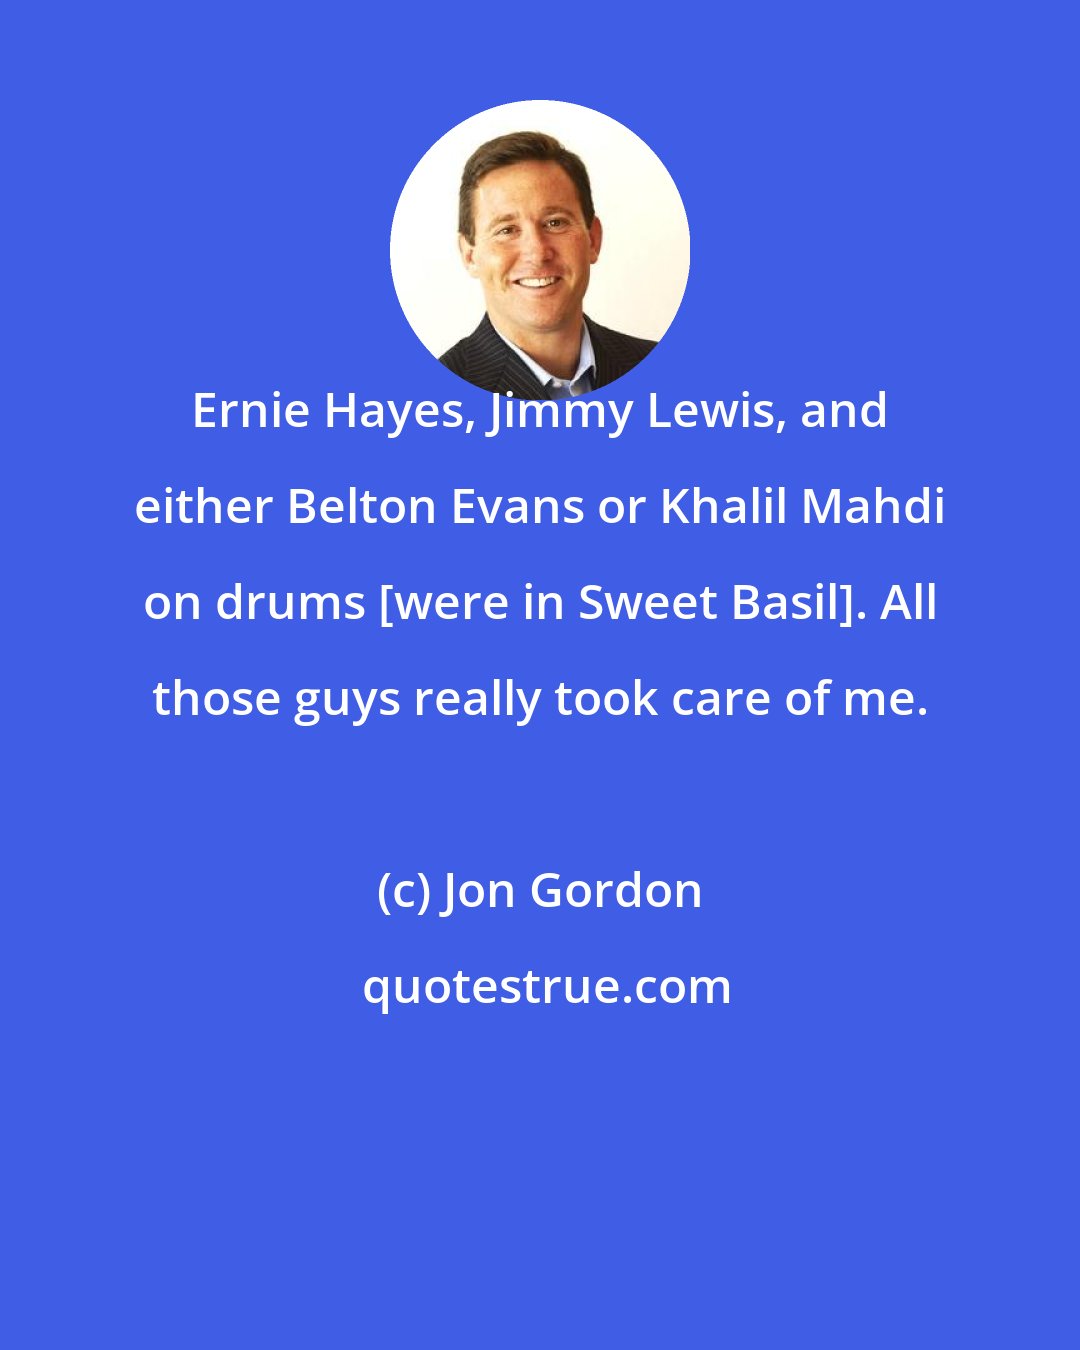 Jon Gordon: Ernie Hayes, Jimmy Lewis, and either Belton Evans or Khalil Mahdi on drums [were in Sweet Basil]. All those guys really took care of me.